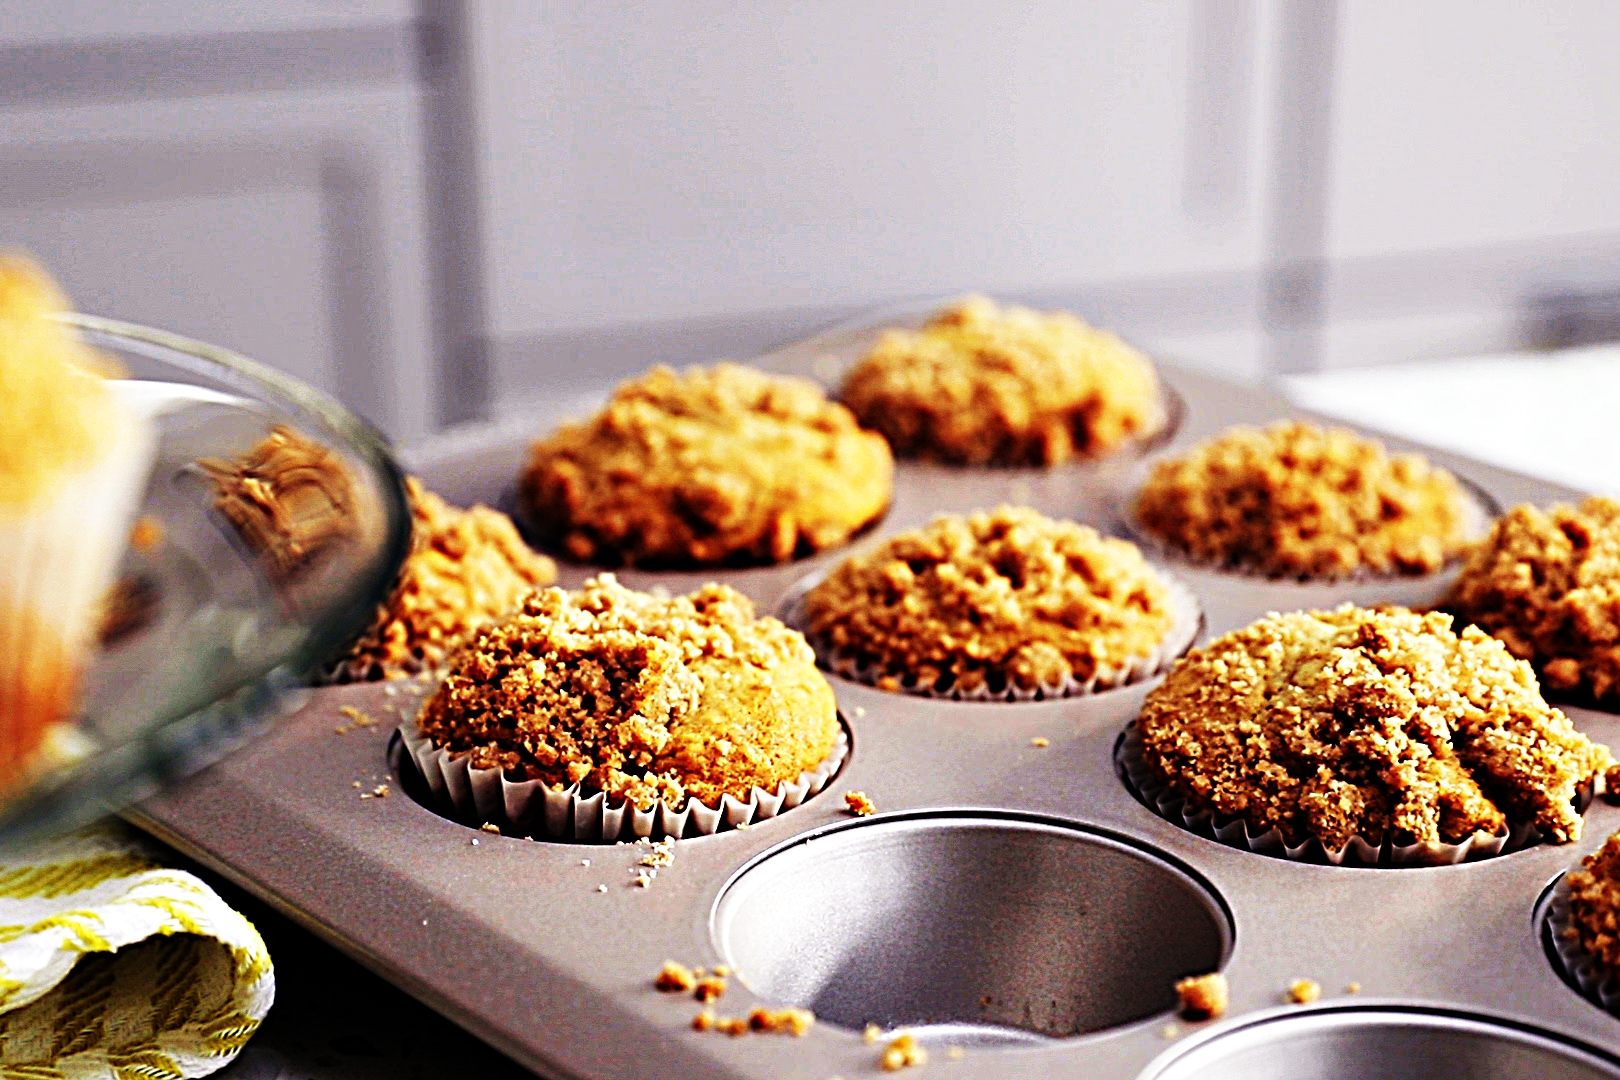 Stupid-Easy Recipe for Coffee Cake Muffins (#1 Top-Rated)